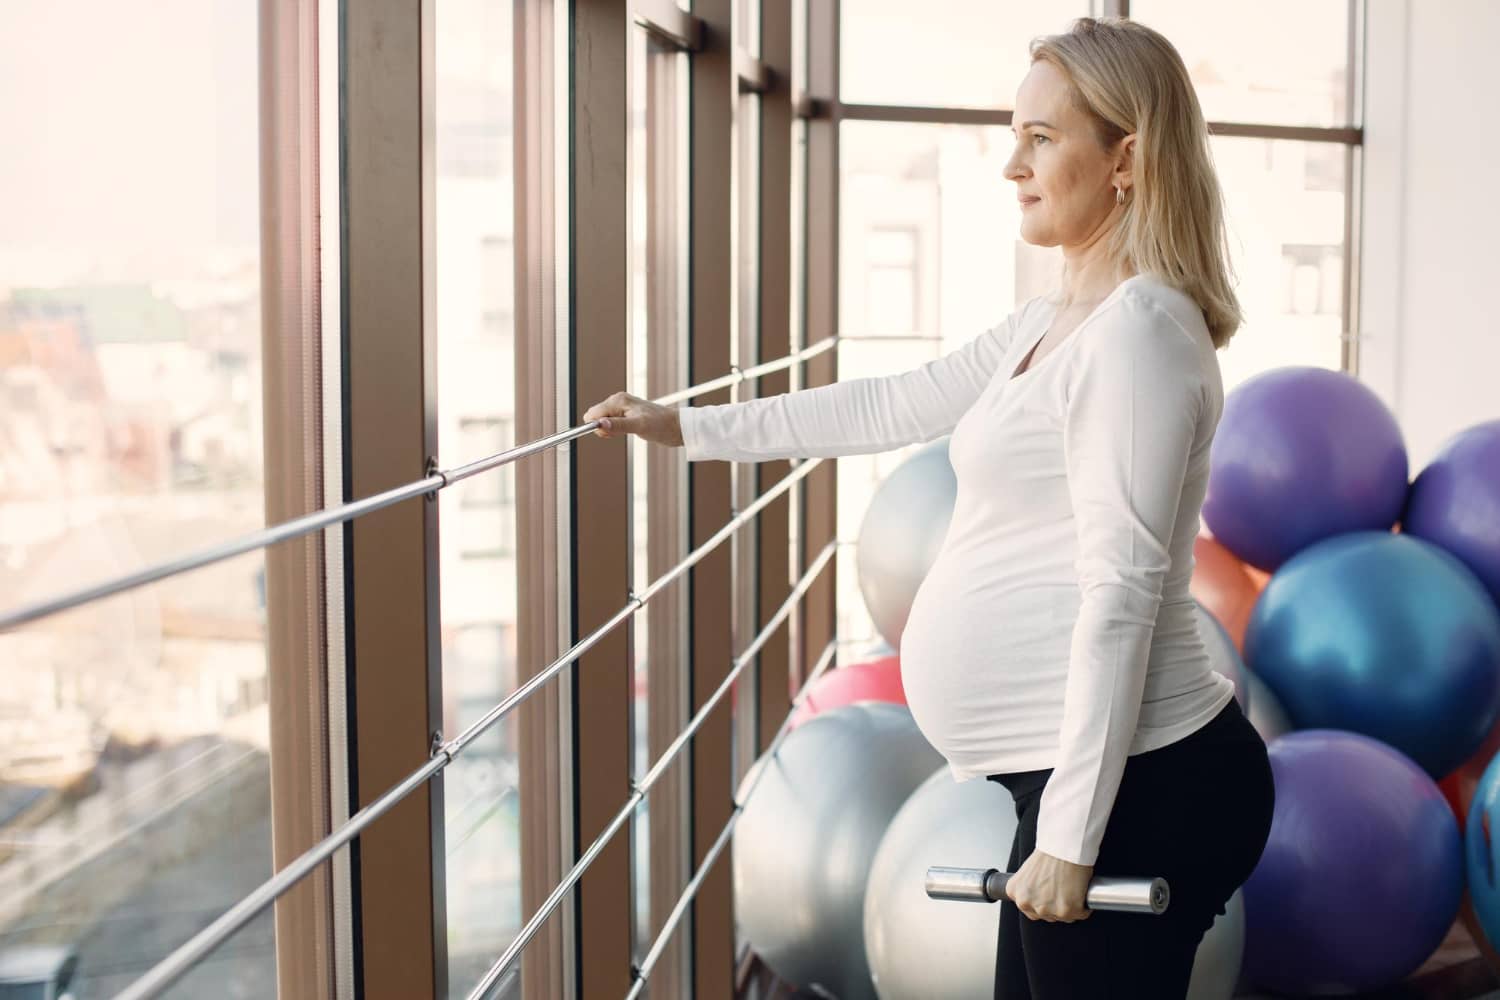 caucasian-pregnant-woman-third-trimester-doing-fitness-excercise-indoors-woman-bright-fitness-studio-with-big-windows-blonde-woman-wearing-whit-shirt-black-leggins